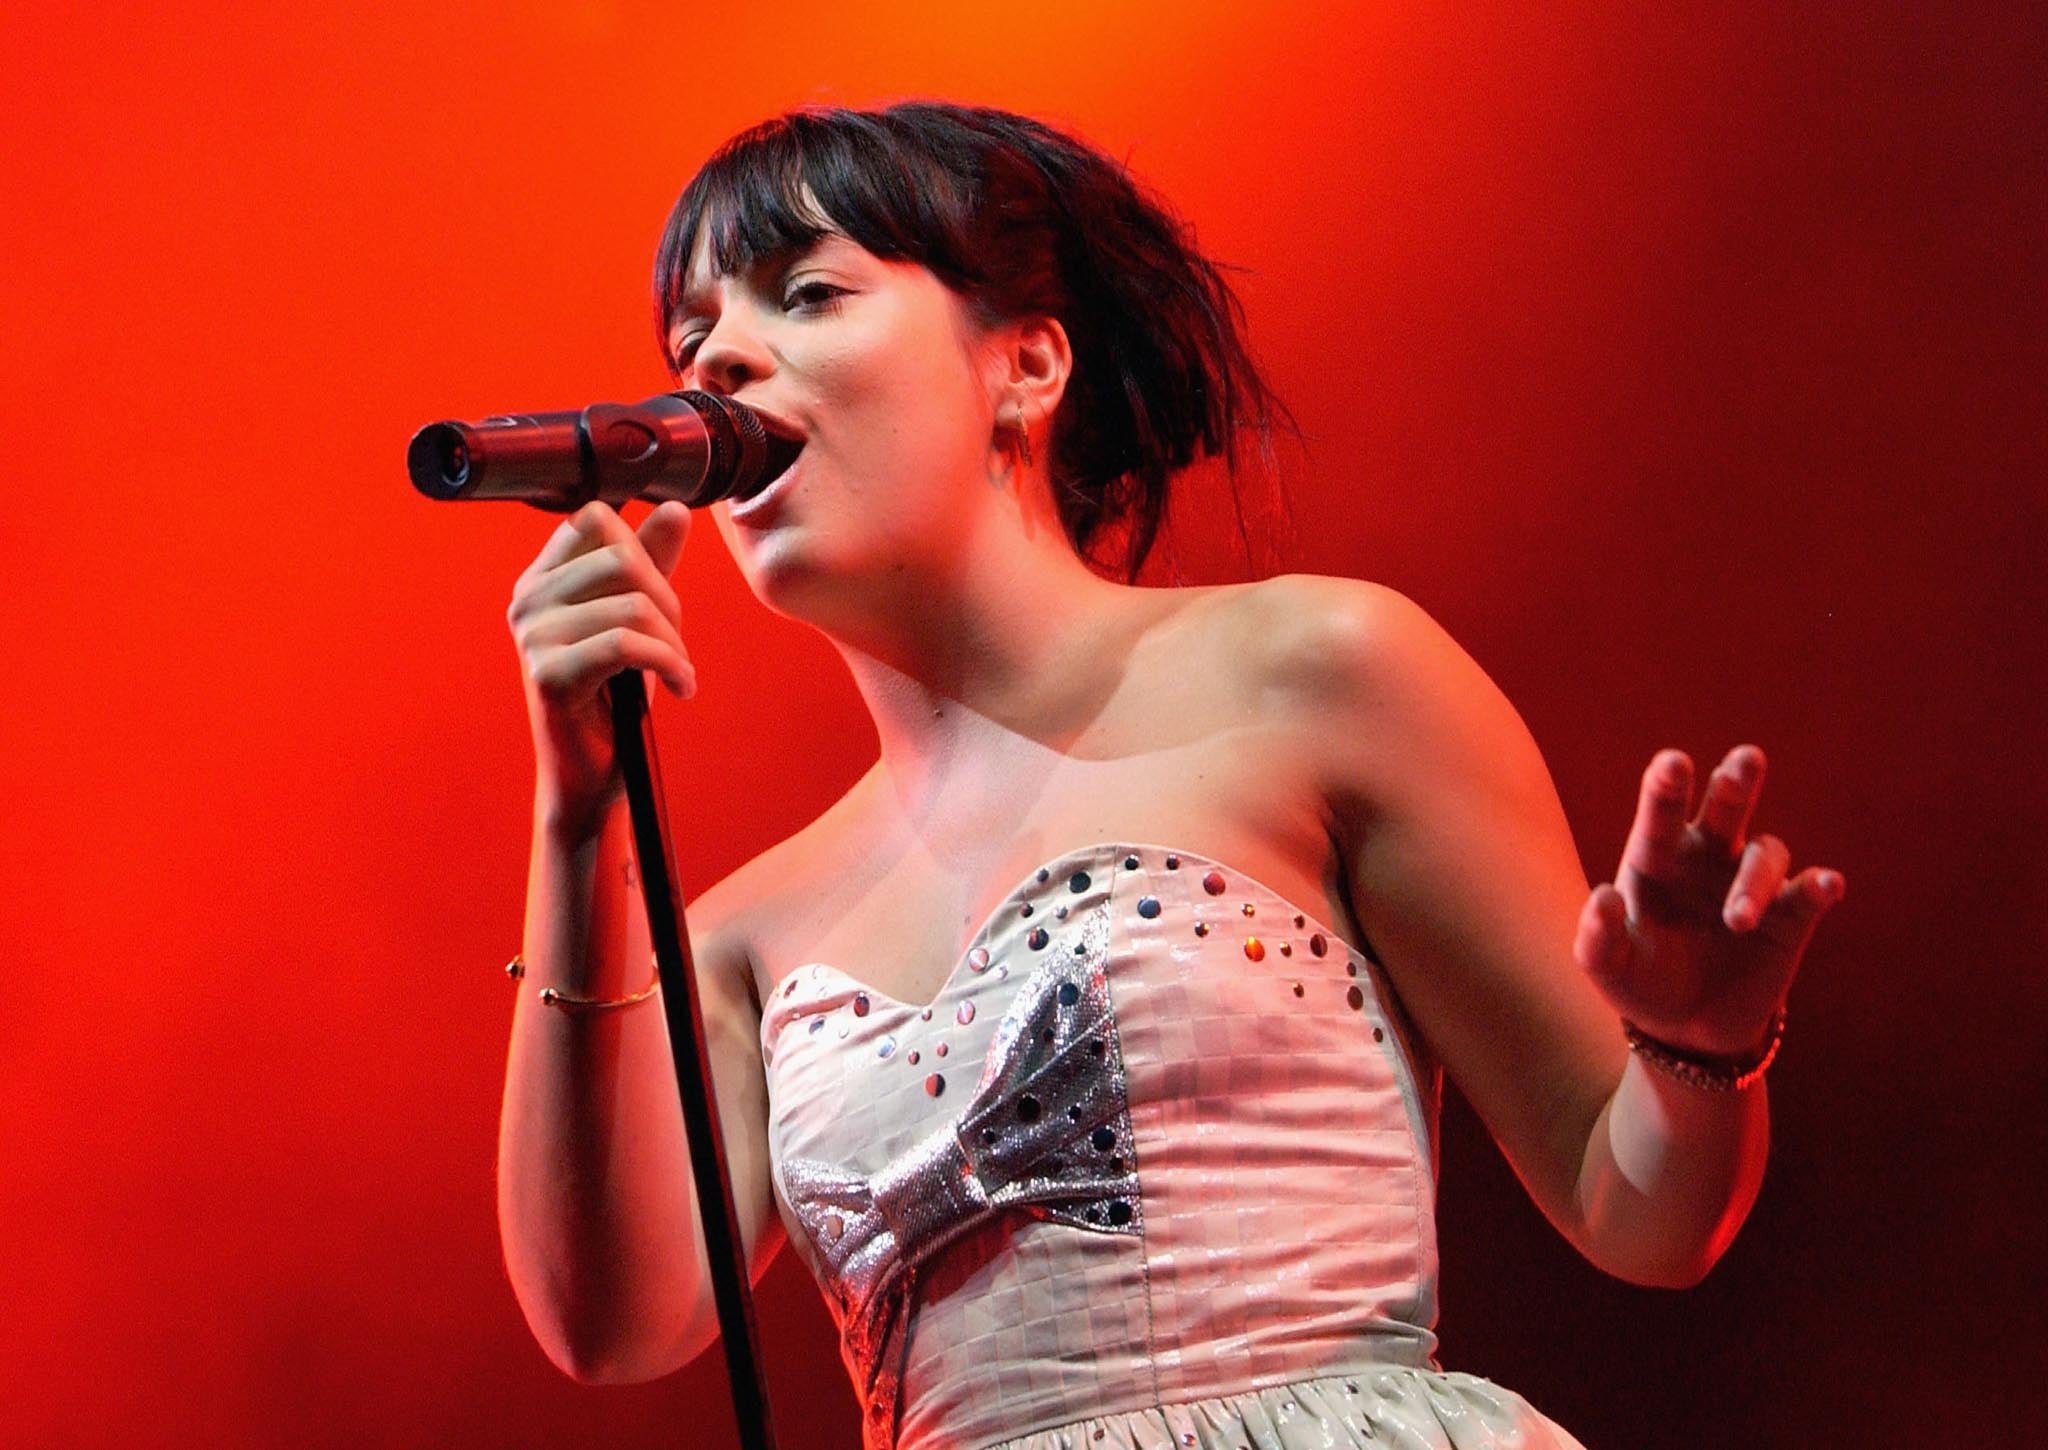 Lily Allen has called her new album Sheezus, a reference to Kanye West's Yeezus